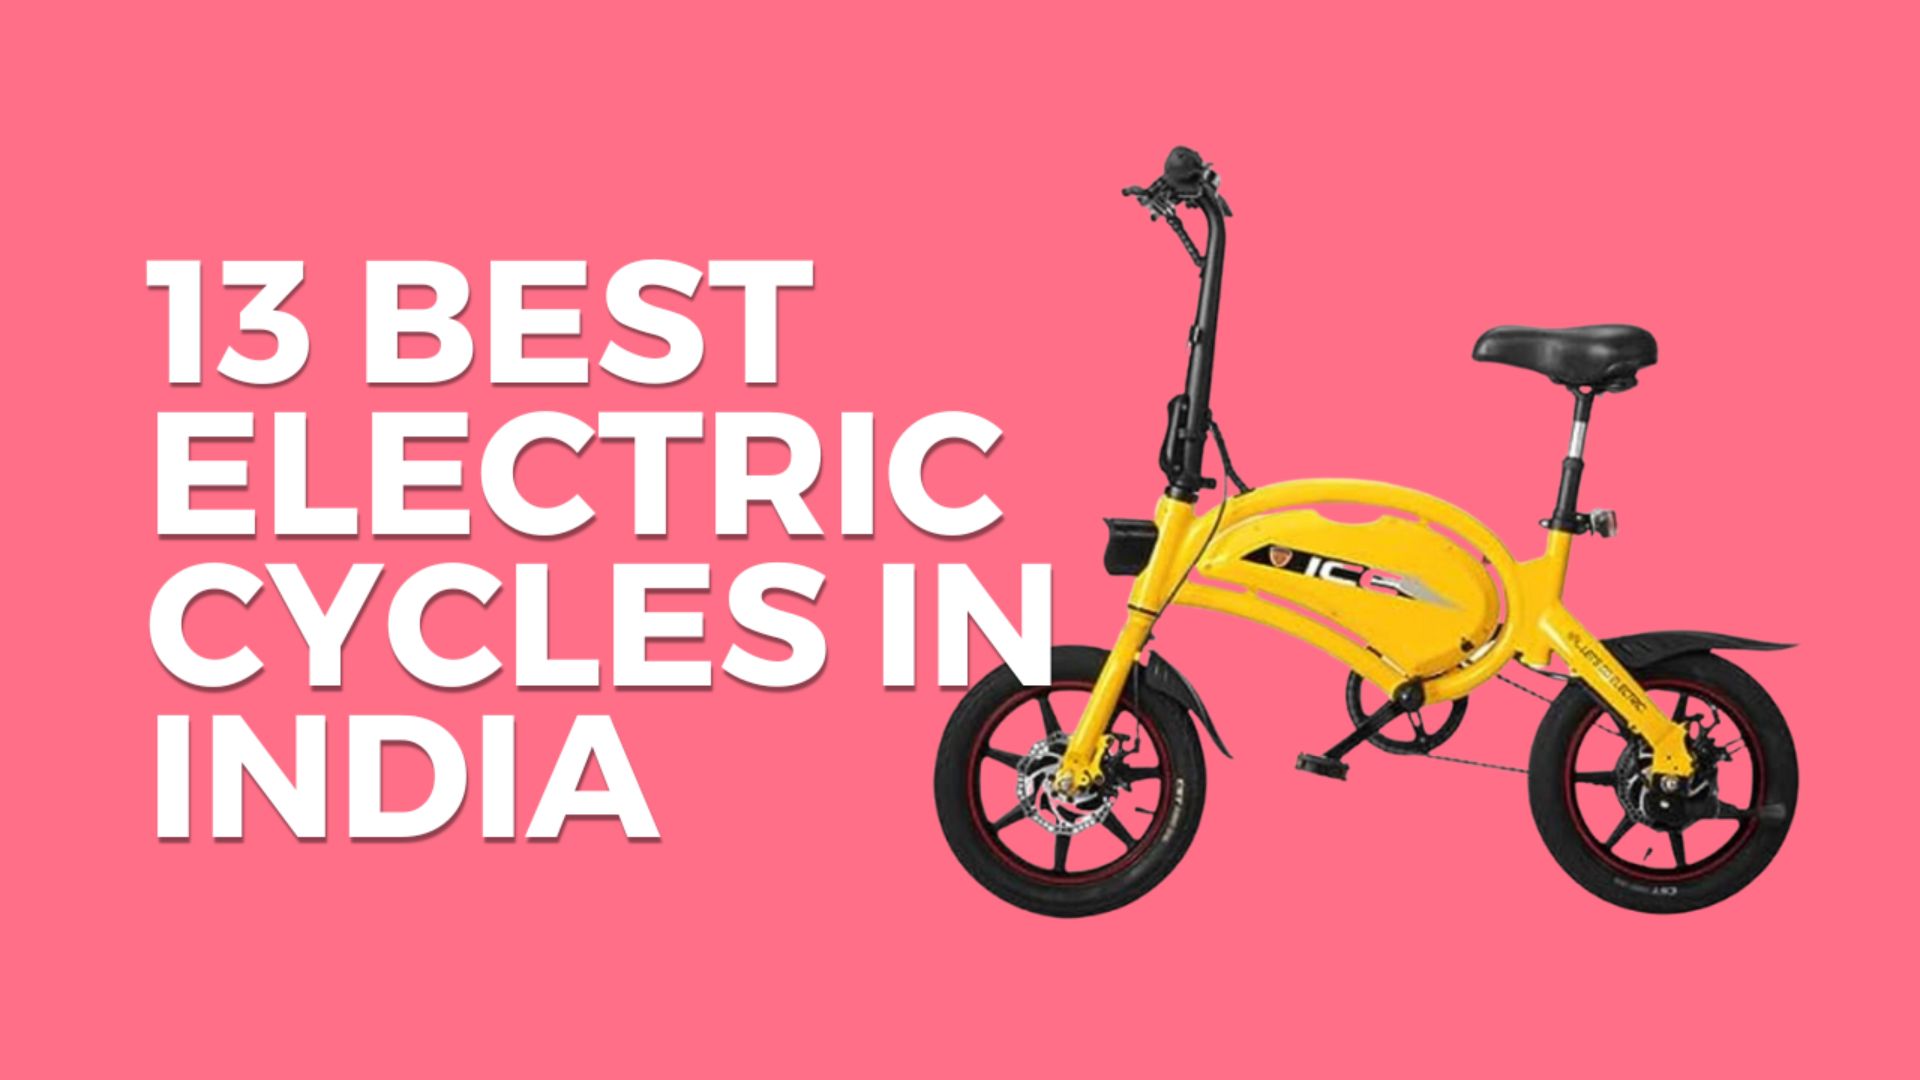 13 Best Electric Cycles in India